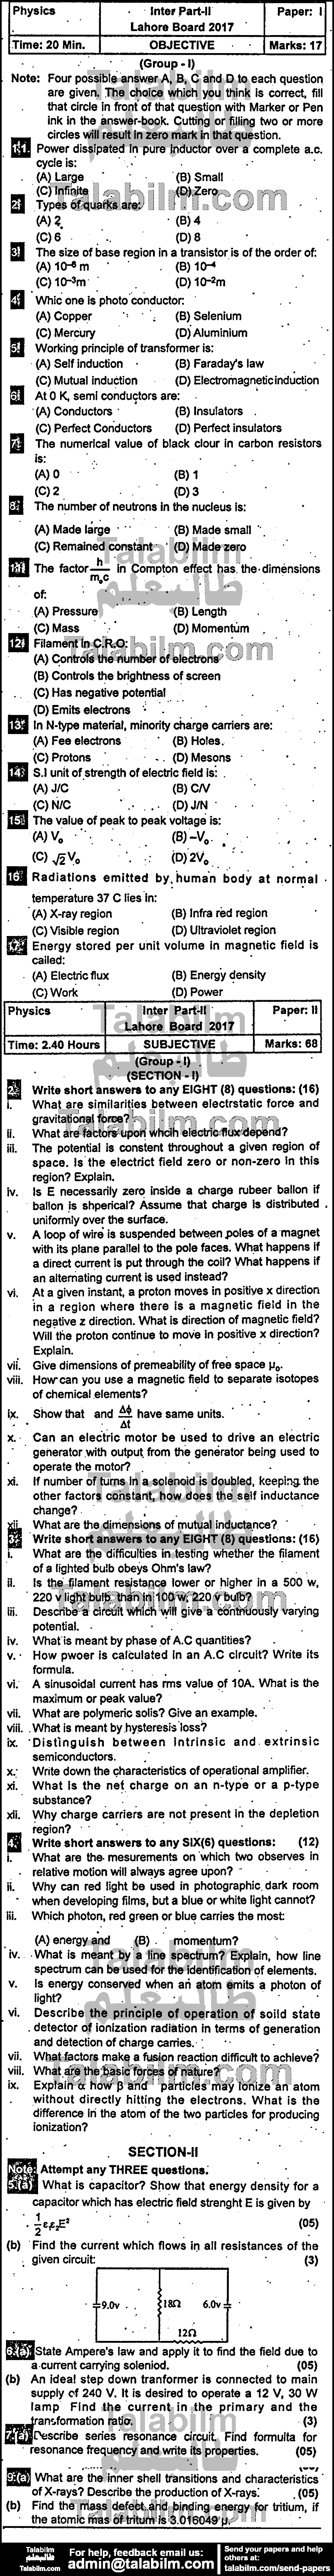 Physics 0 past paper for Group-I 2017